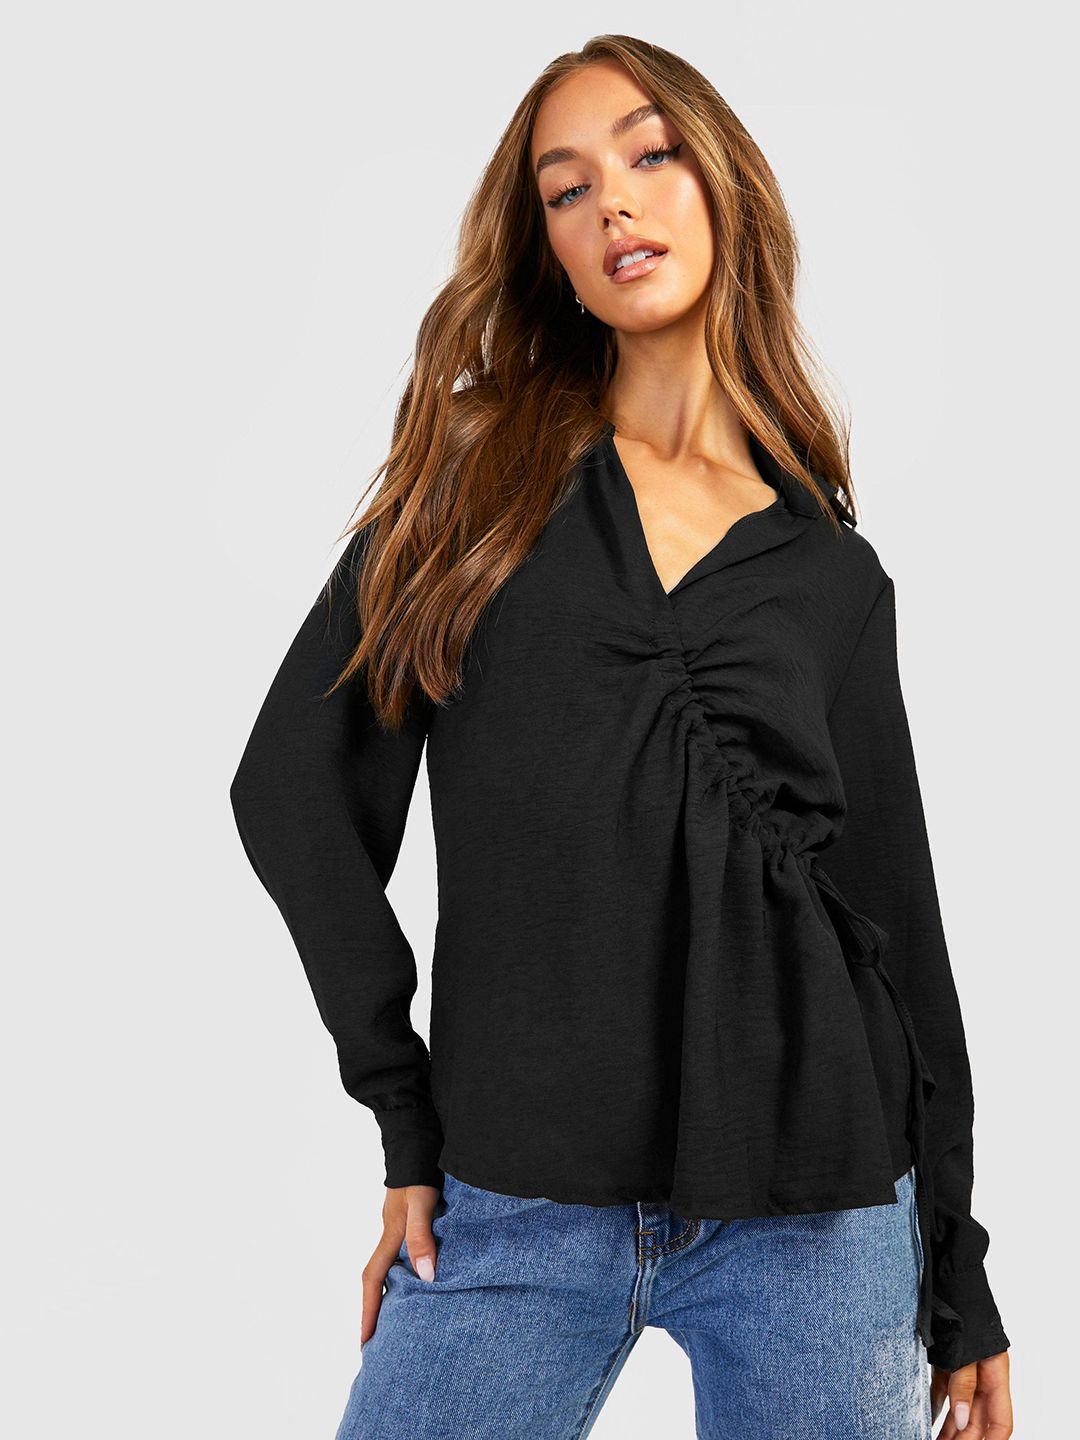 Boohoo Textured Gathered Detail Shirt Style Top Price in India